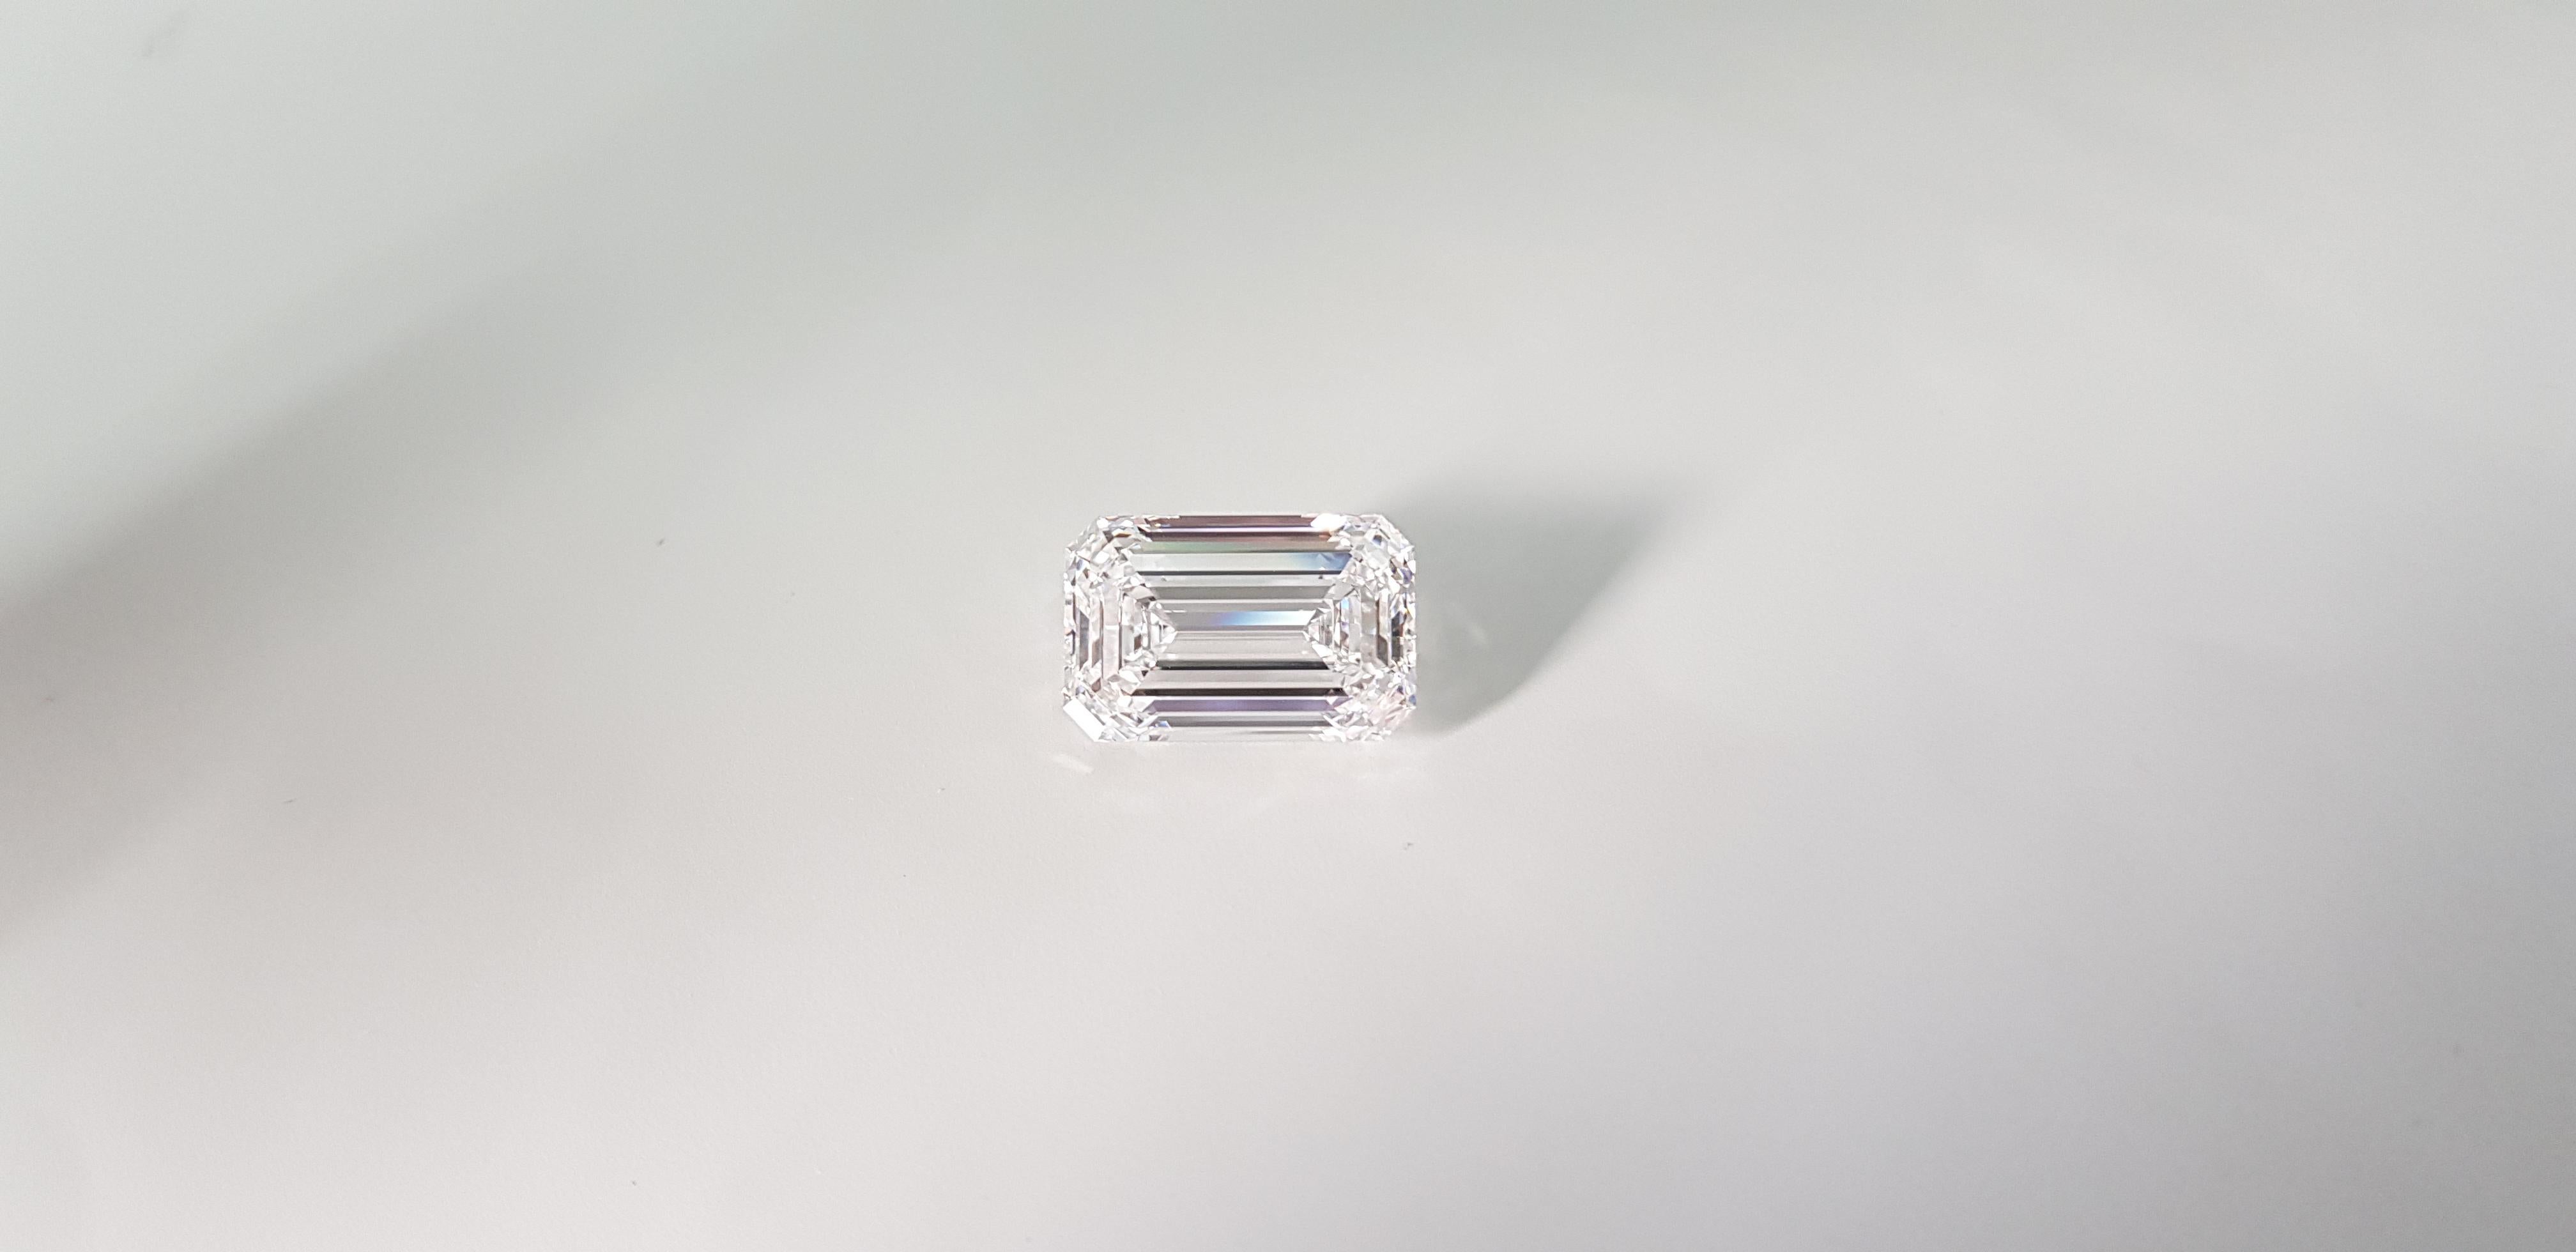 This exquisite ring features a majestic GIA certified emerald cut diamond weighing 5 carats. The main diamond, with its emerald cut that exudes elegance and geometric purity, is set between two trapezoid diamonds, accentuating its unparalleled